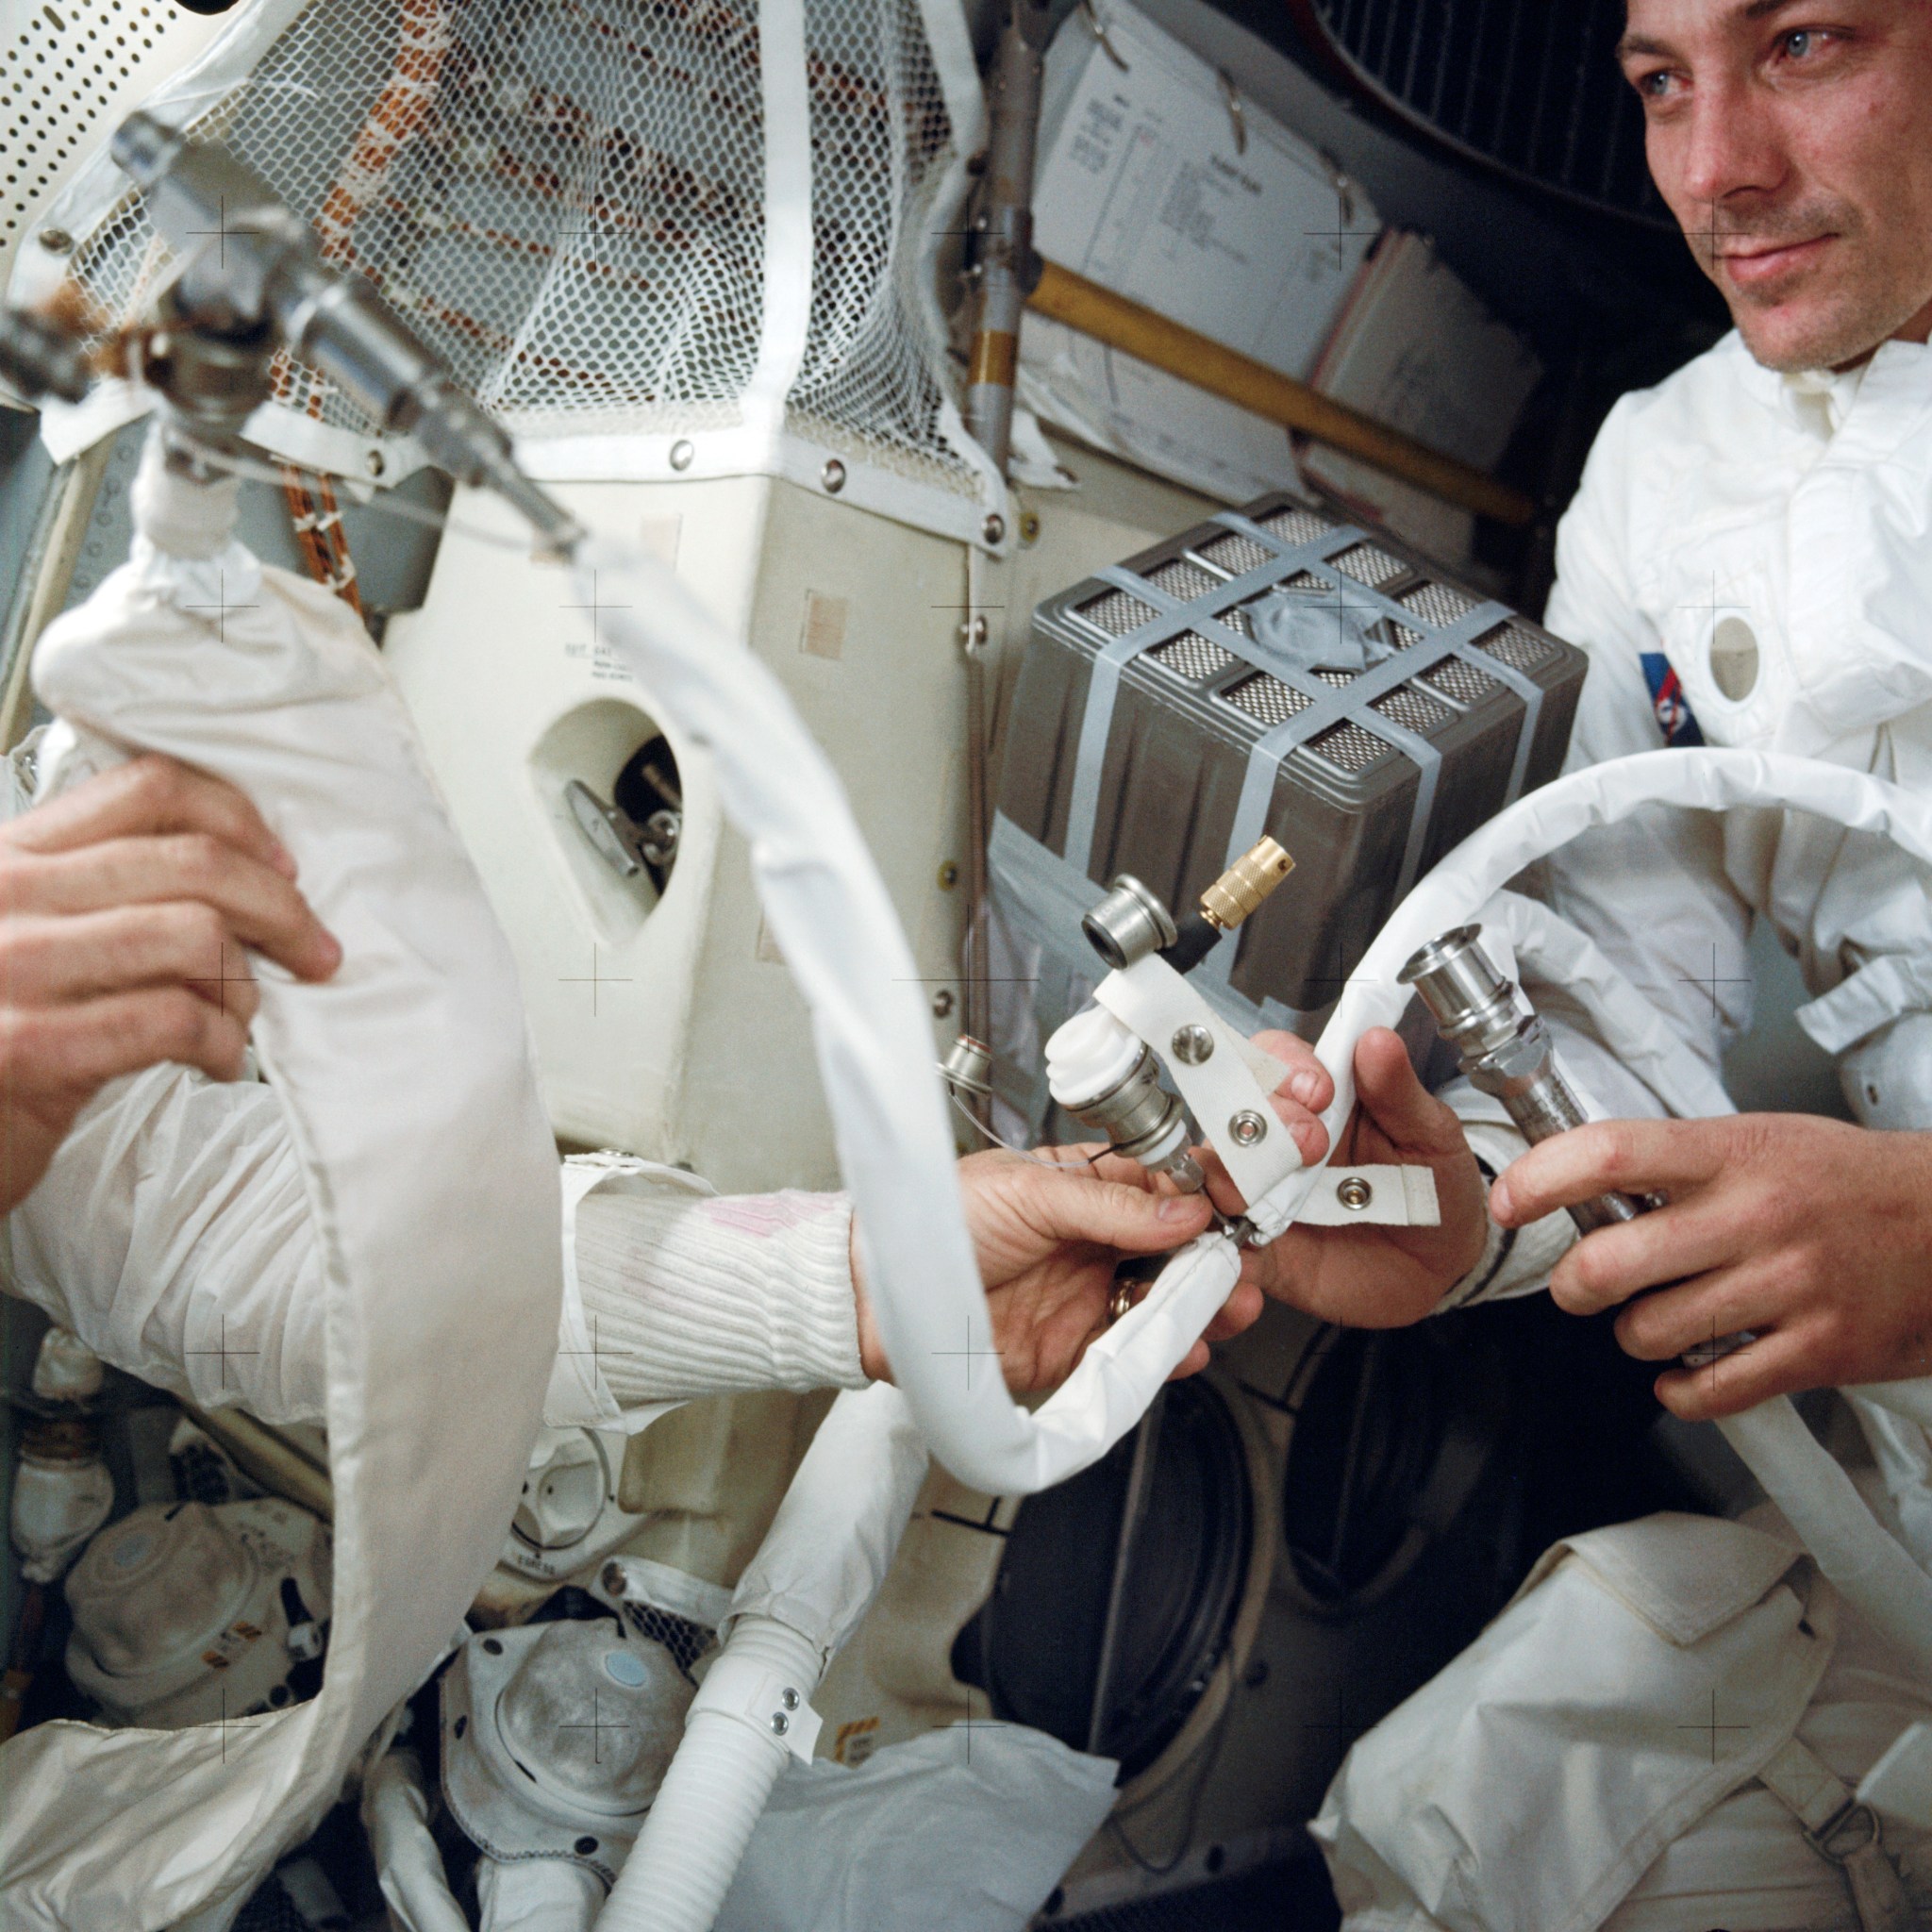 Apollo 13 Crew Installing ?Mail Box? for Purging Carbon Dioxide From Lunar Module?April 14, 1970.